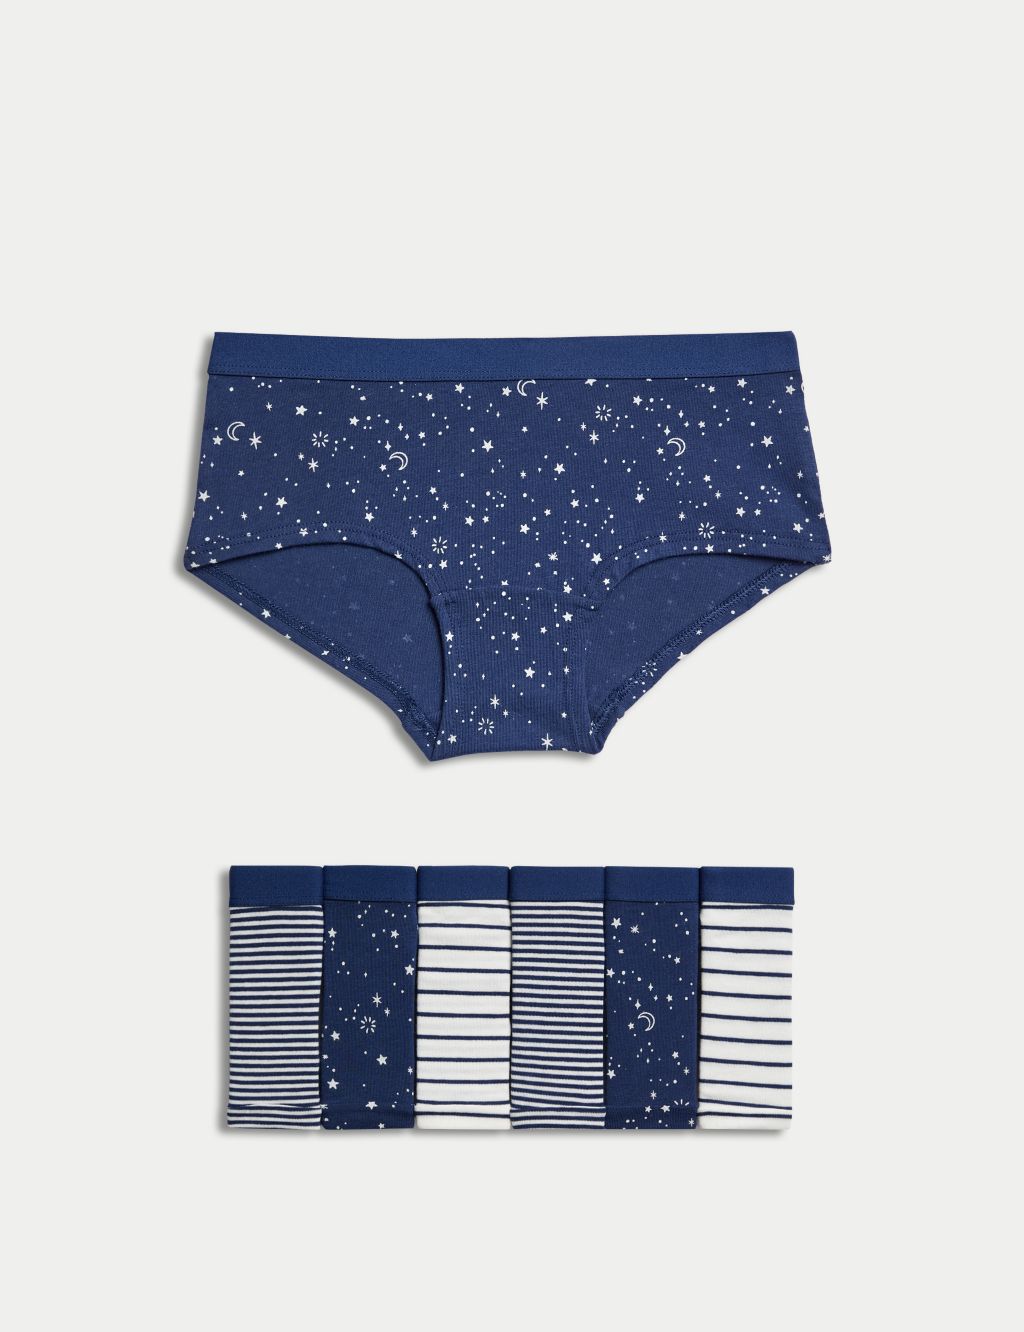 7-9yrs or 10-12yrs Admiral Navy Blue Knickers Pants, Little Boy Knickers,  Knicker Pants, Ringbearer Outfit 